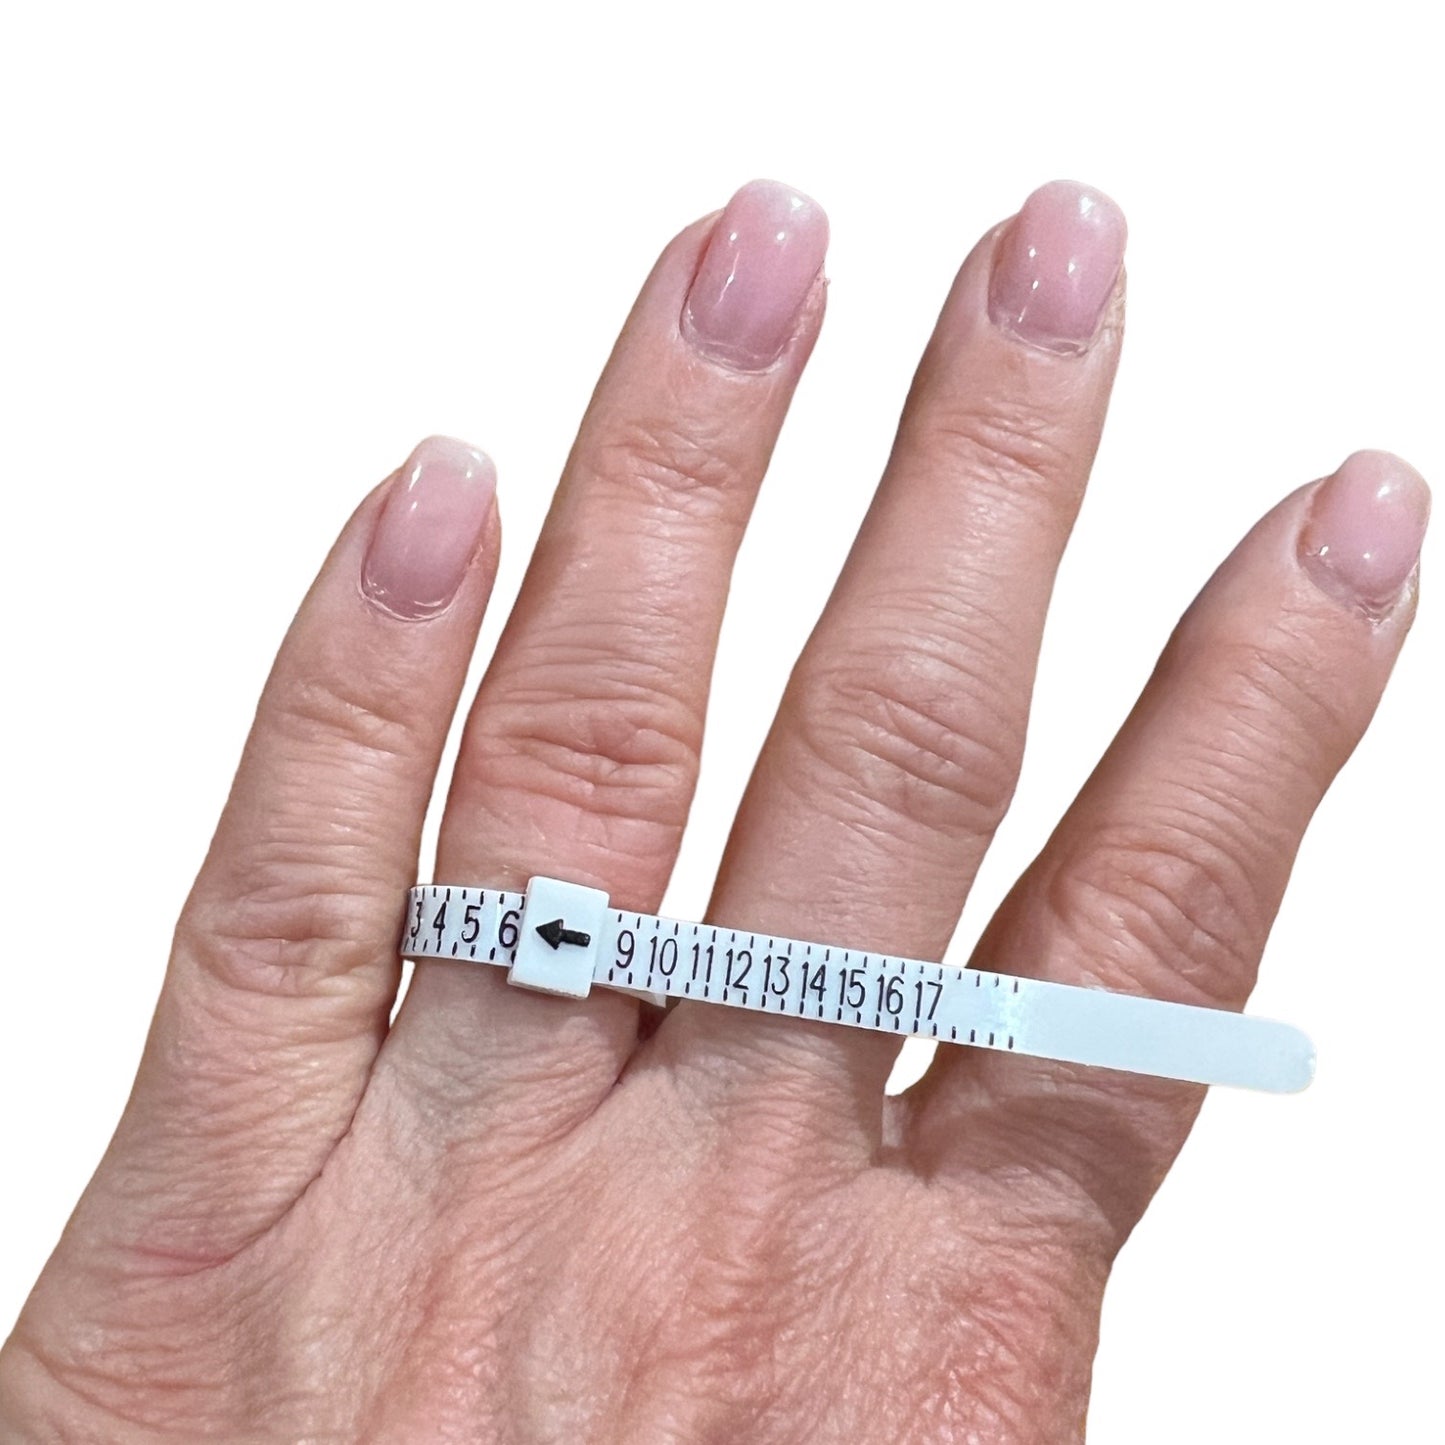 Ring Sizer - Finger Measuring Tool for Sizing Rings